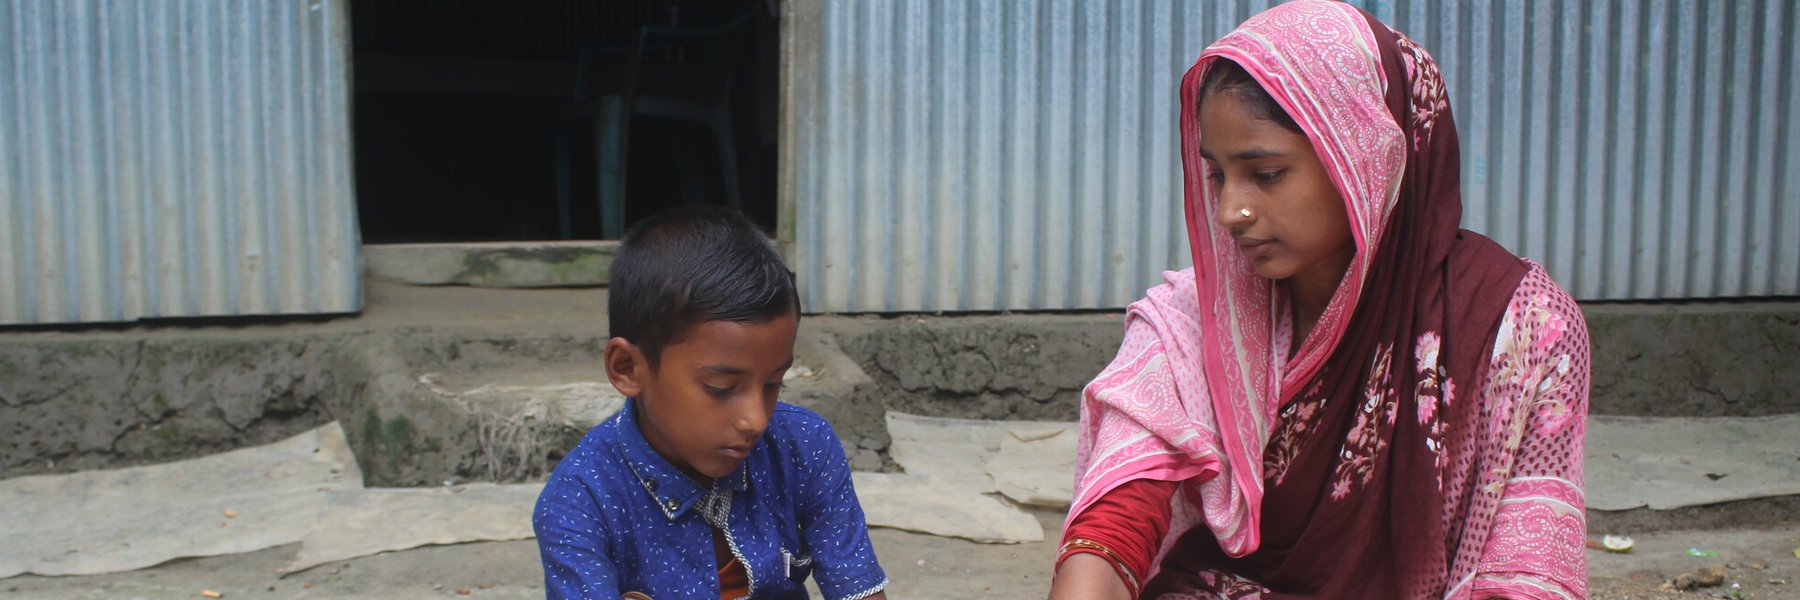 Shabana and her son sit in front of their home on the ground looking at a textbook together